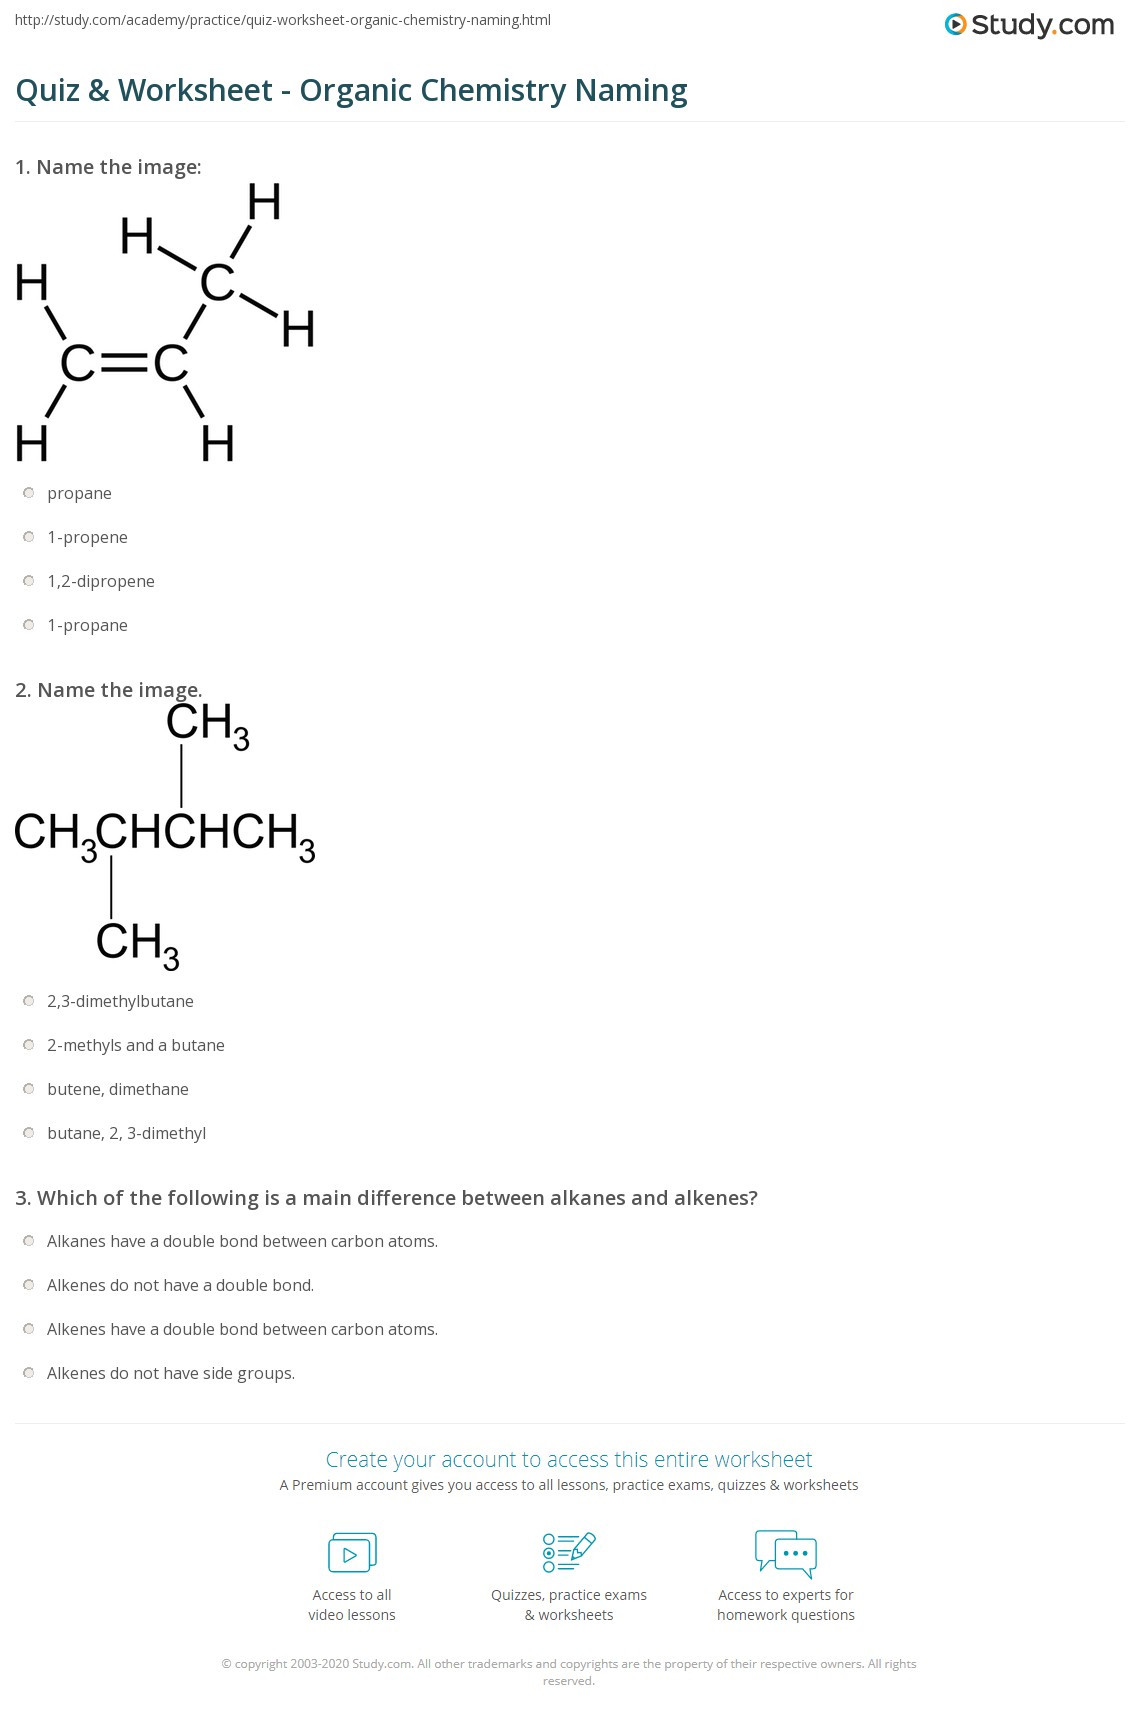 Organic Chemistry Worksheet with Answers Quiz &amp; Worksheet organic Chemistry Naming